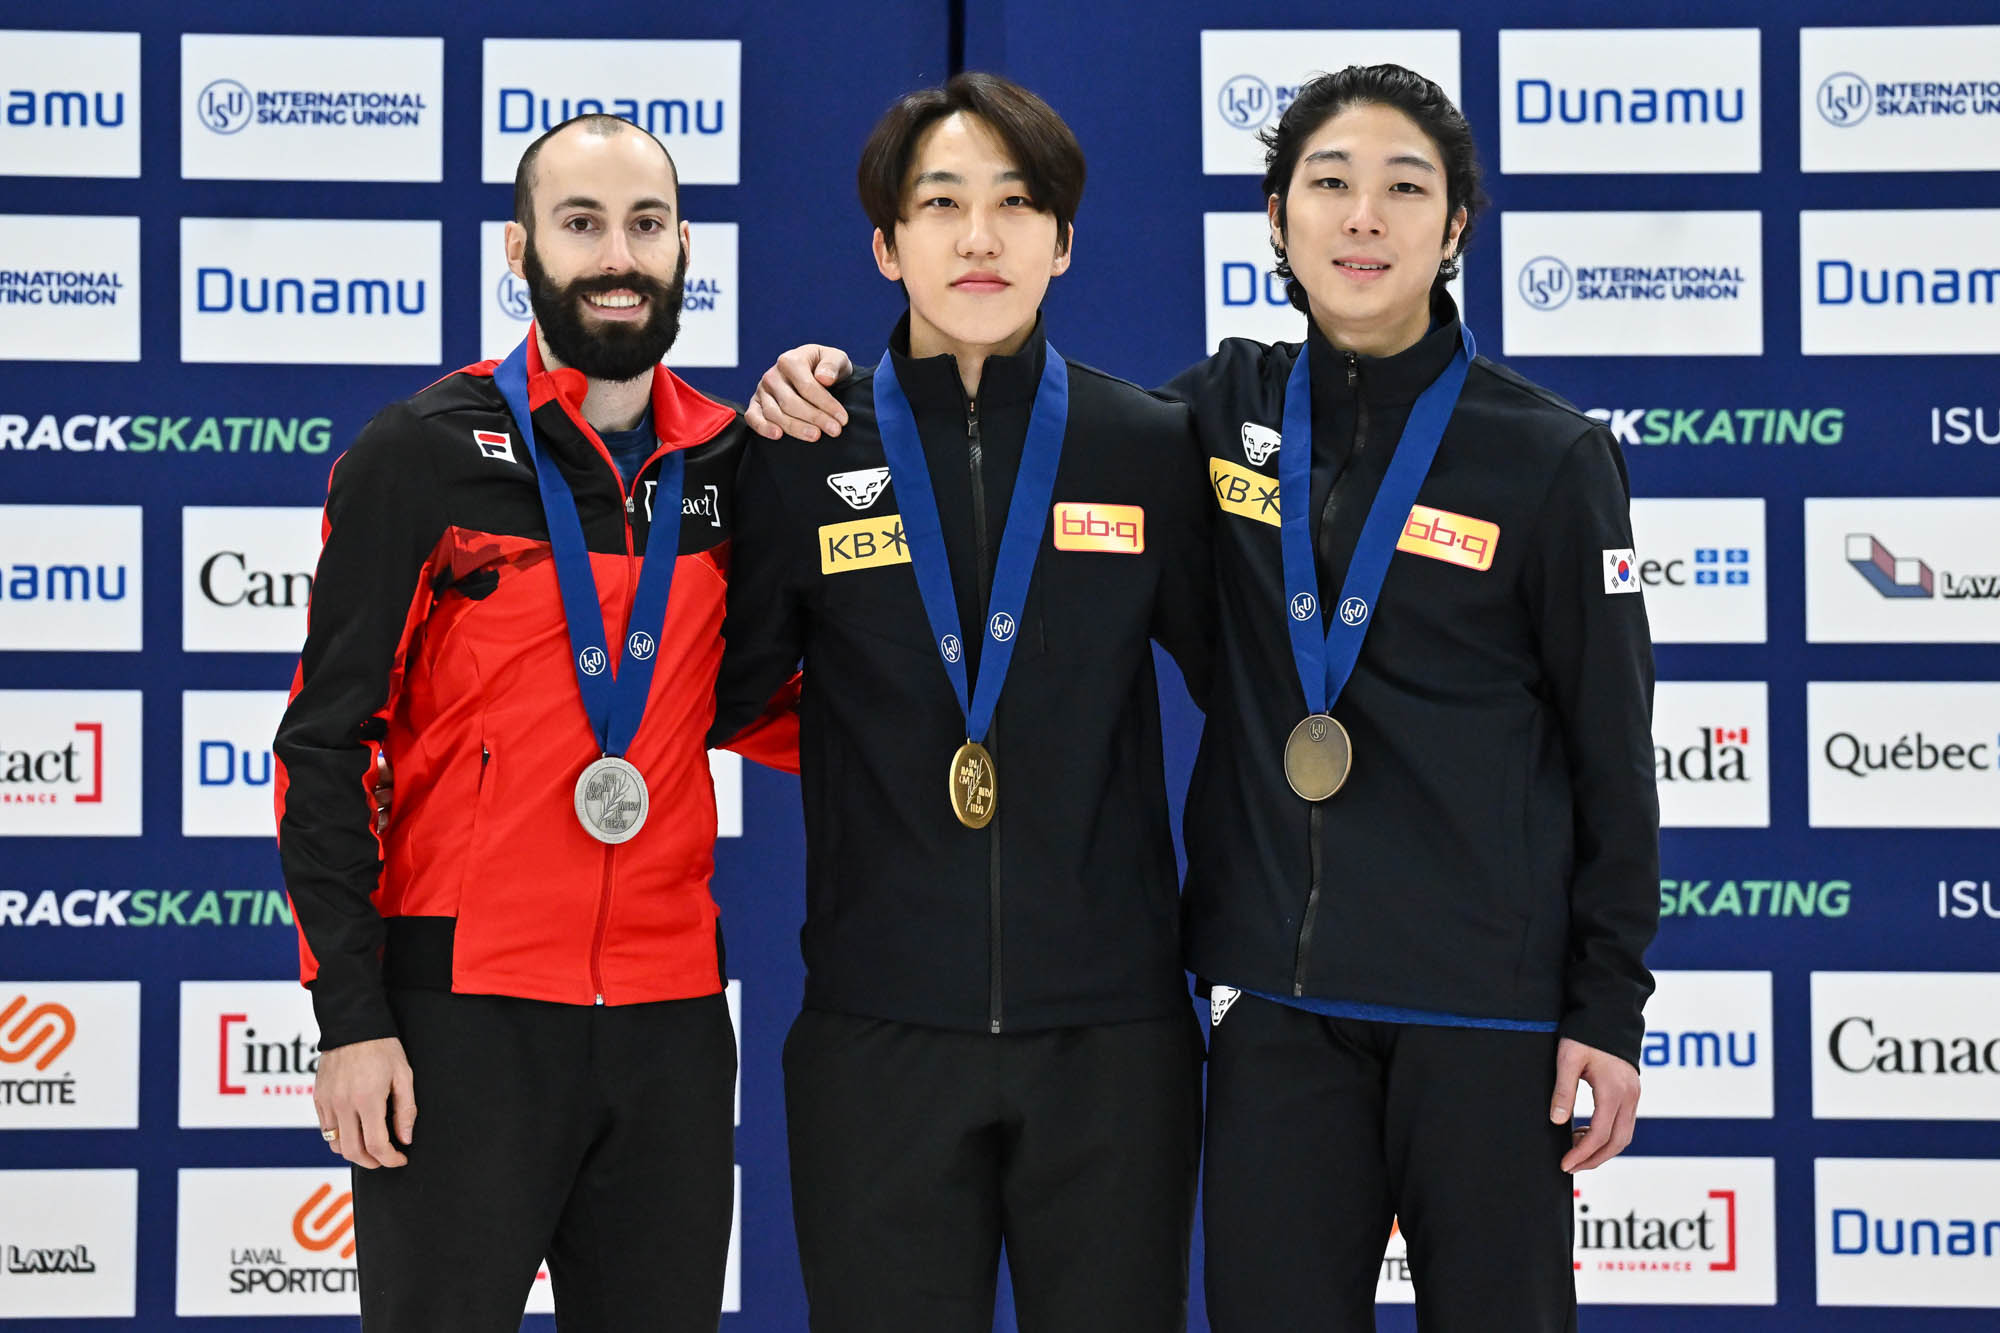 LAVAL, CANADA - NOVEMBER 04:  (L-R) Steven Dubois of Canada, Park Ji Won of the Republic of Korea and Kim Gun Woo of the Republic of Korea pose with their medals after competing in the men’s 1500 m final during the ISU Four Continents Short Track Speed Skating Championships at Place Bell on November 4, 2023 in Laval, Quebec, Canada.  (Photo by Minas Panagiotakis - International Skating Union/International Skating Union via Getty Images)